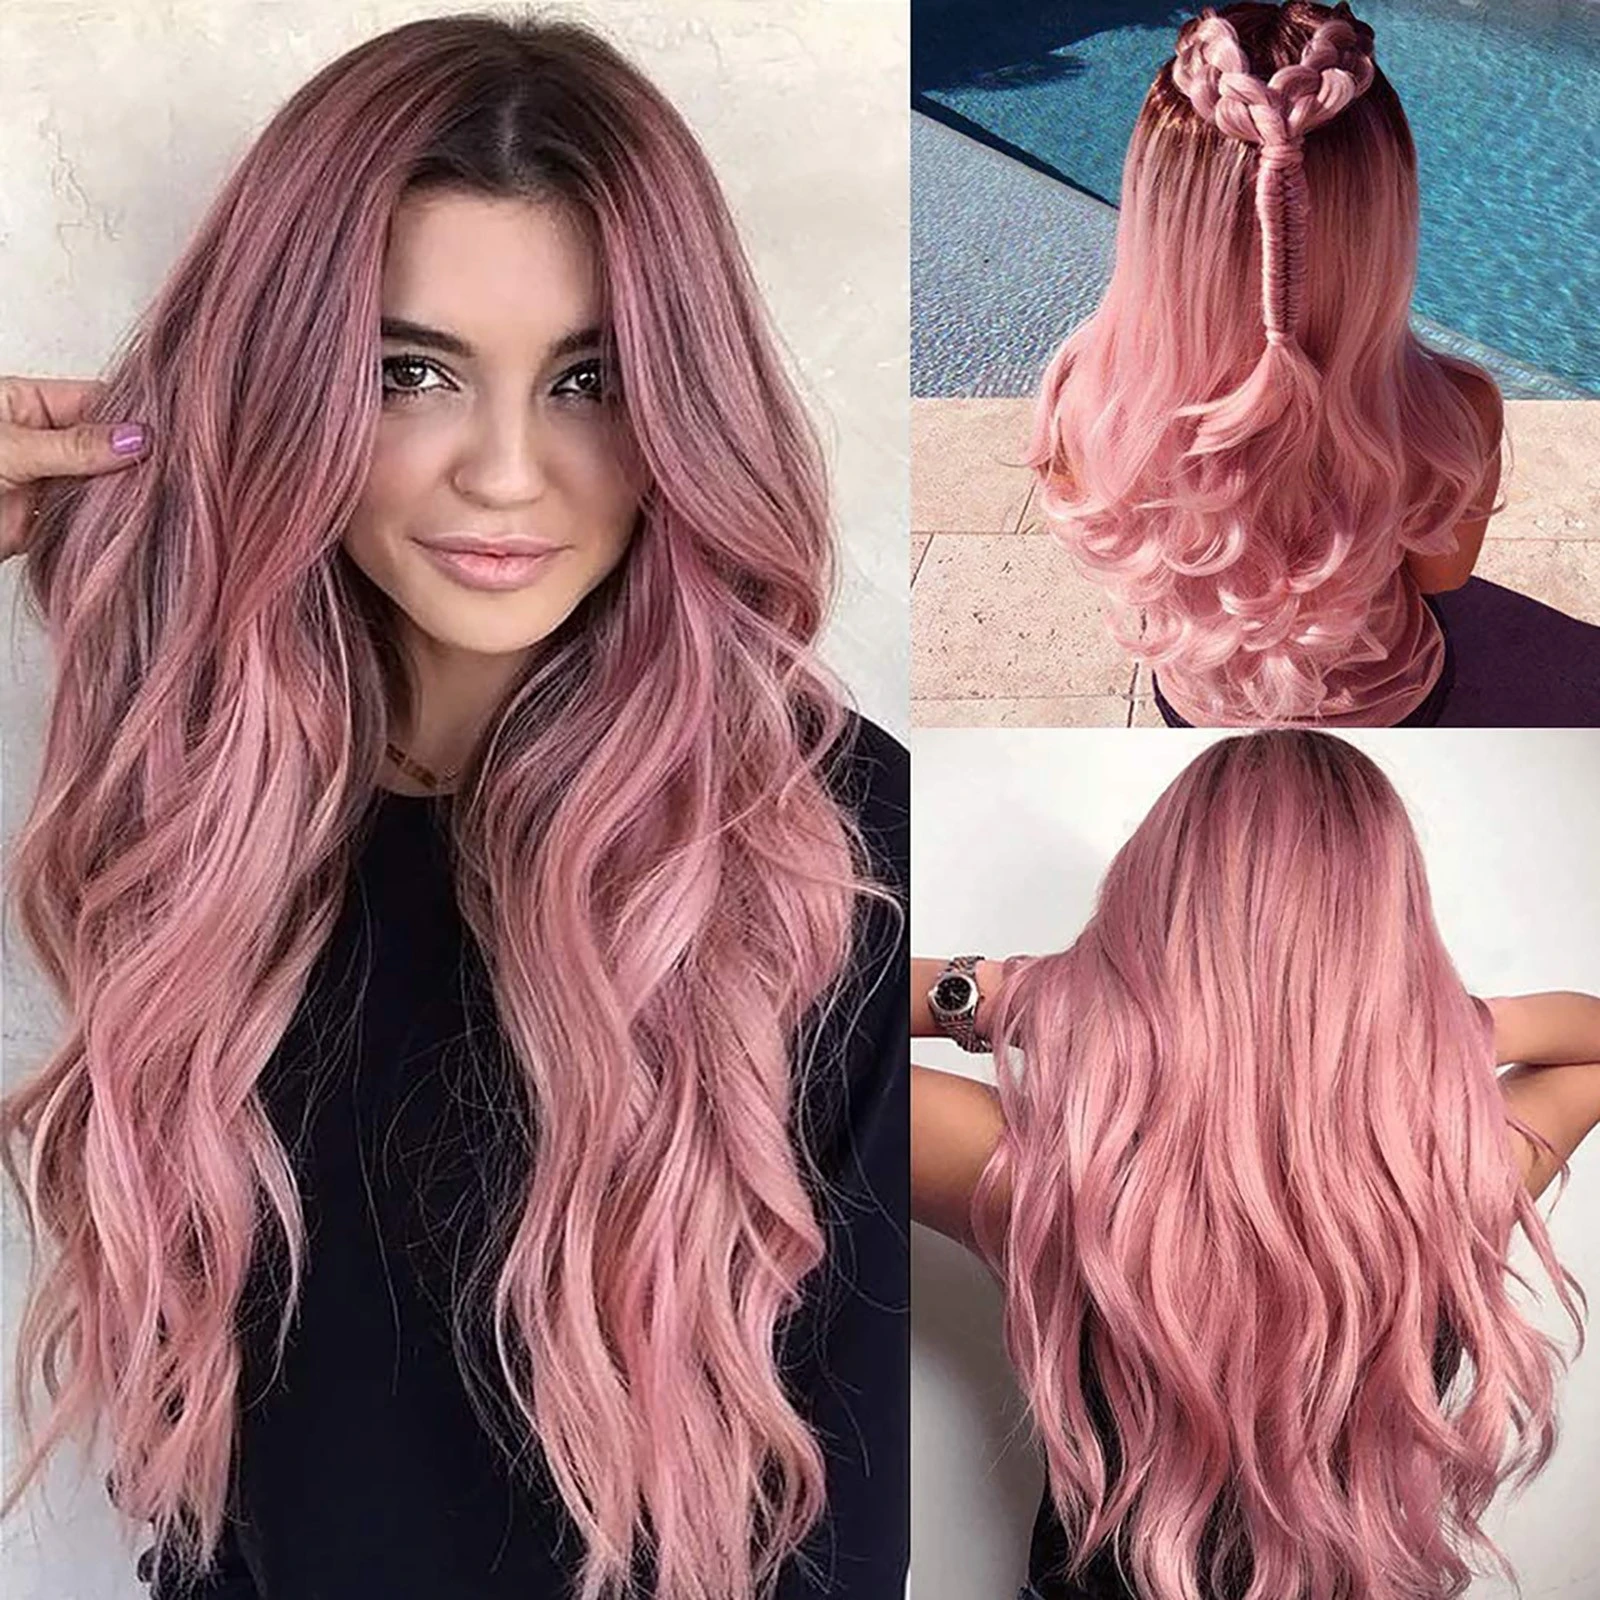 Pink Hair Long Wavy Wigs Heat Resistant Synthetic Wig For Women Daily/Party  Natural Black to Brown/Purple/Ash Blonde Wig|Phụ Kiện Trang Phục Bé Trai| -  AliExpress